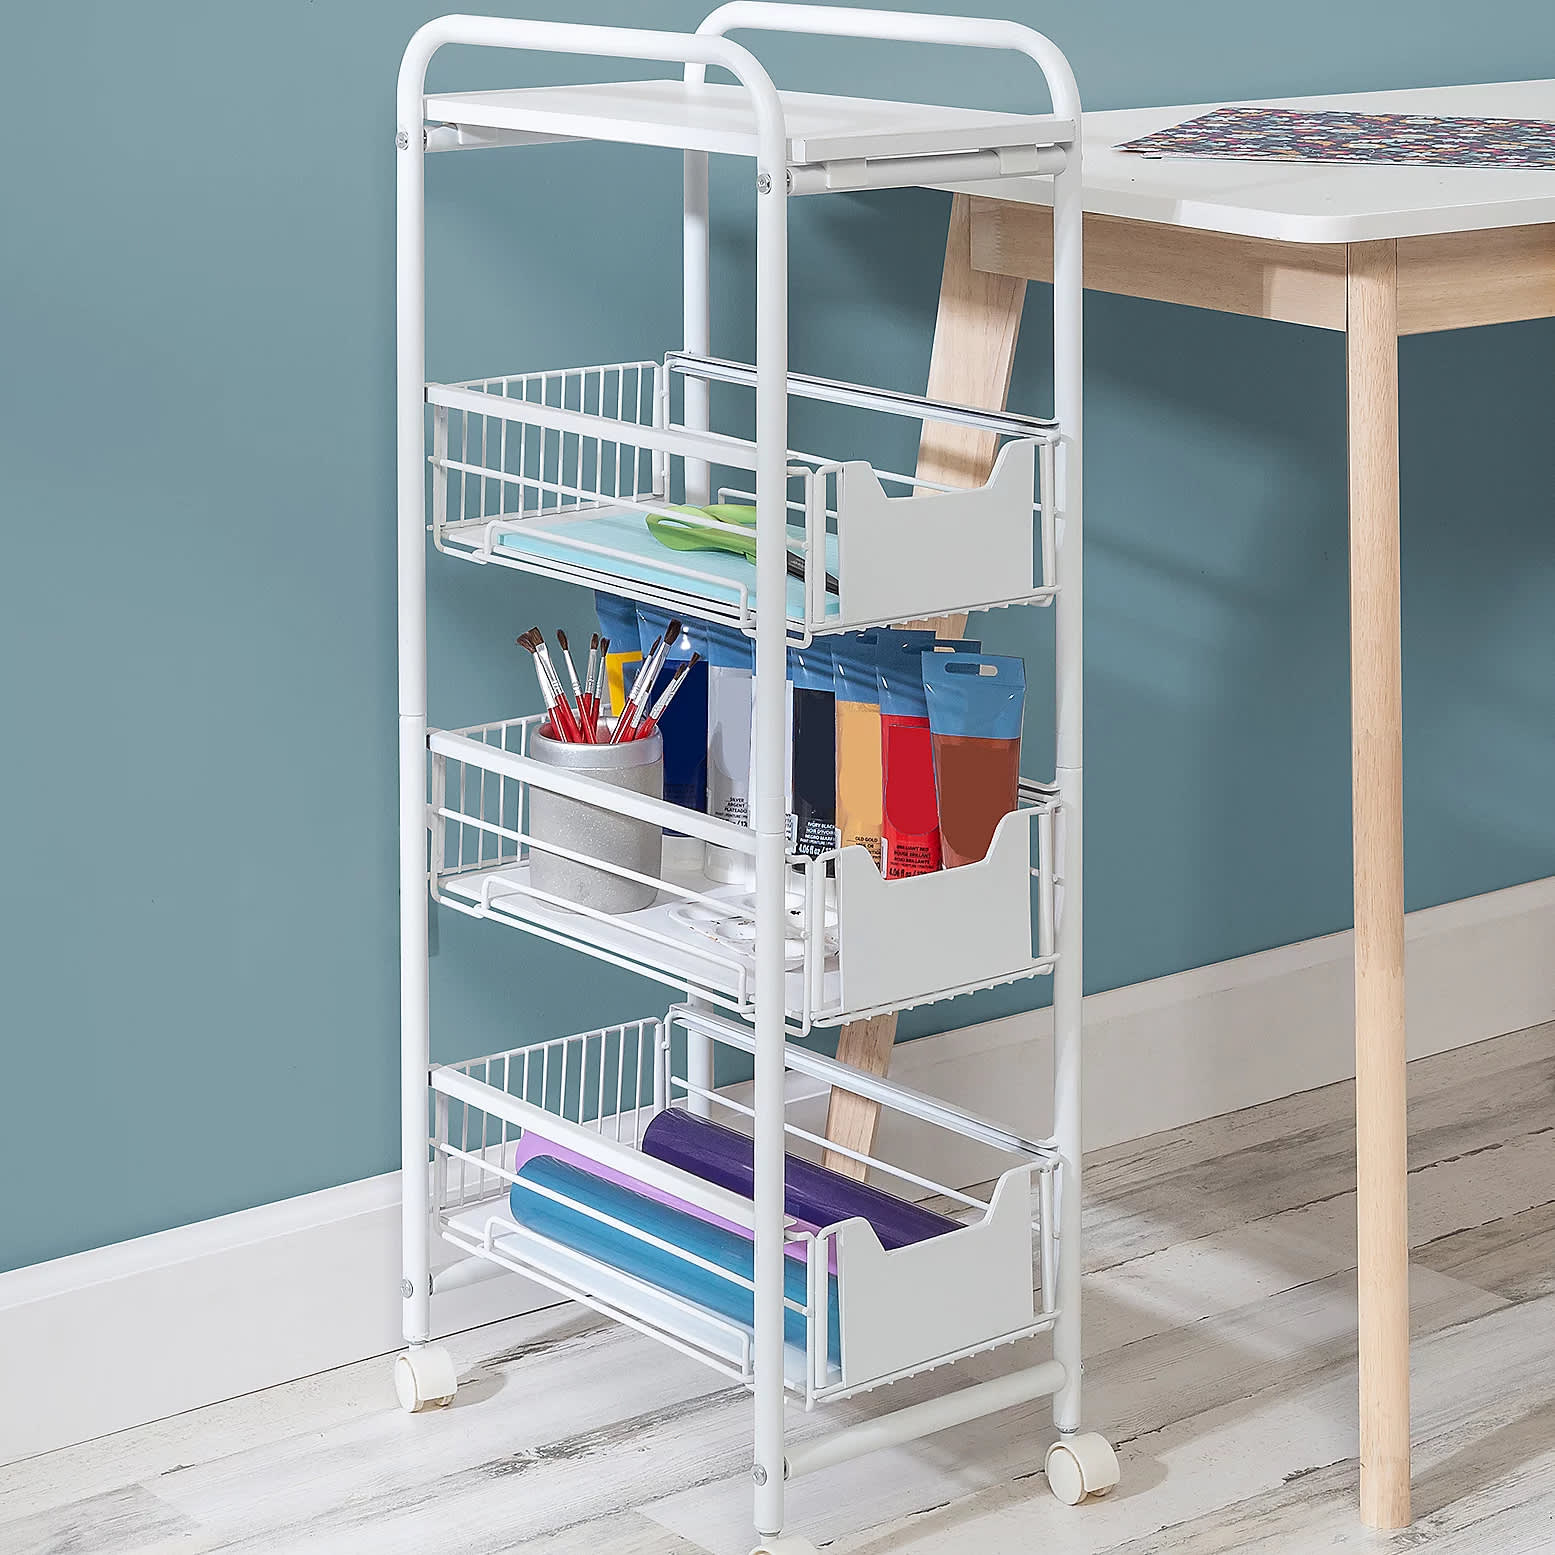 17 Best Narrow Cabinets for Small-Space Storage